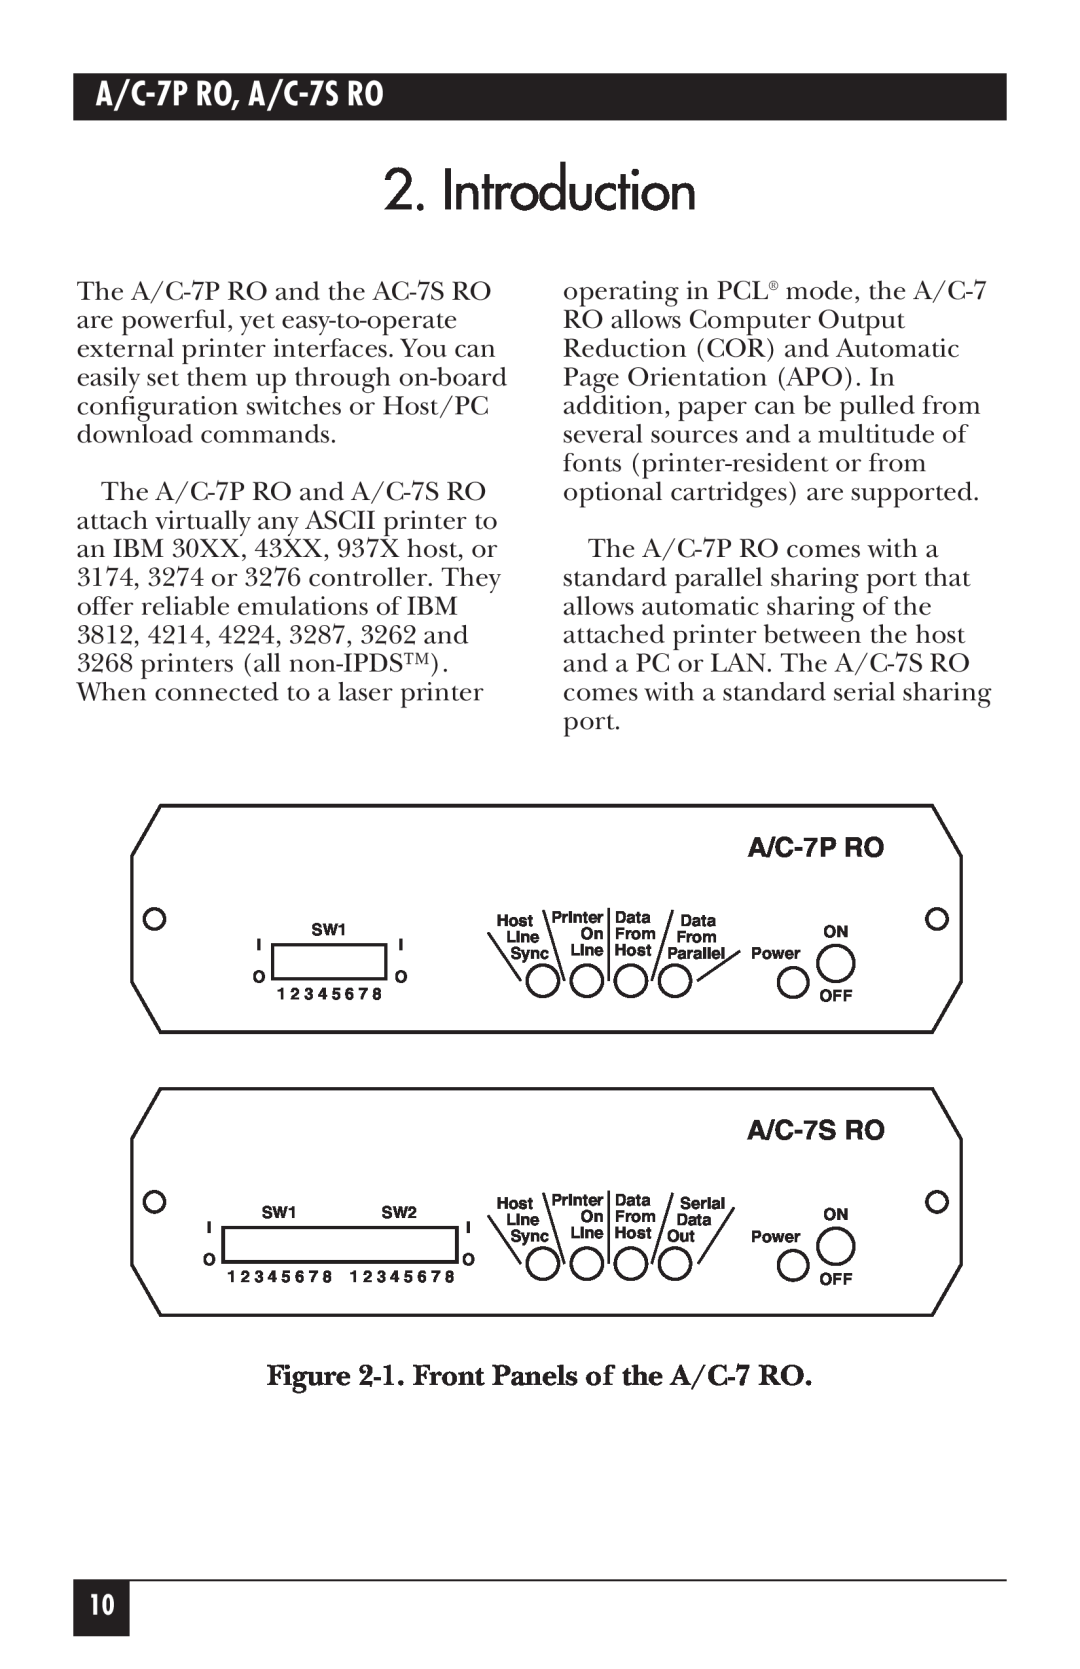 Black Box manual Introduction, 1. Front Panels of the A/C-7 RO, A/C-7P RO, A/C-7S RO 